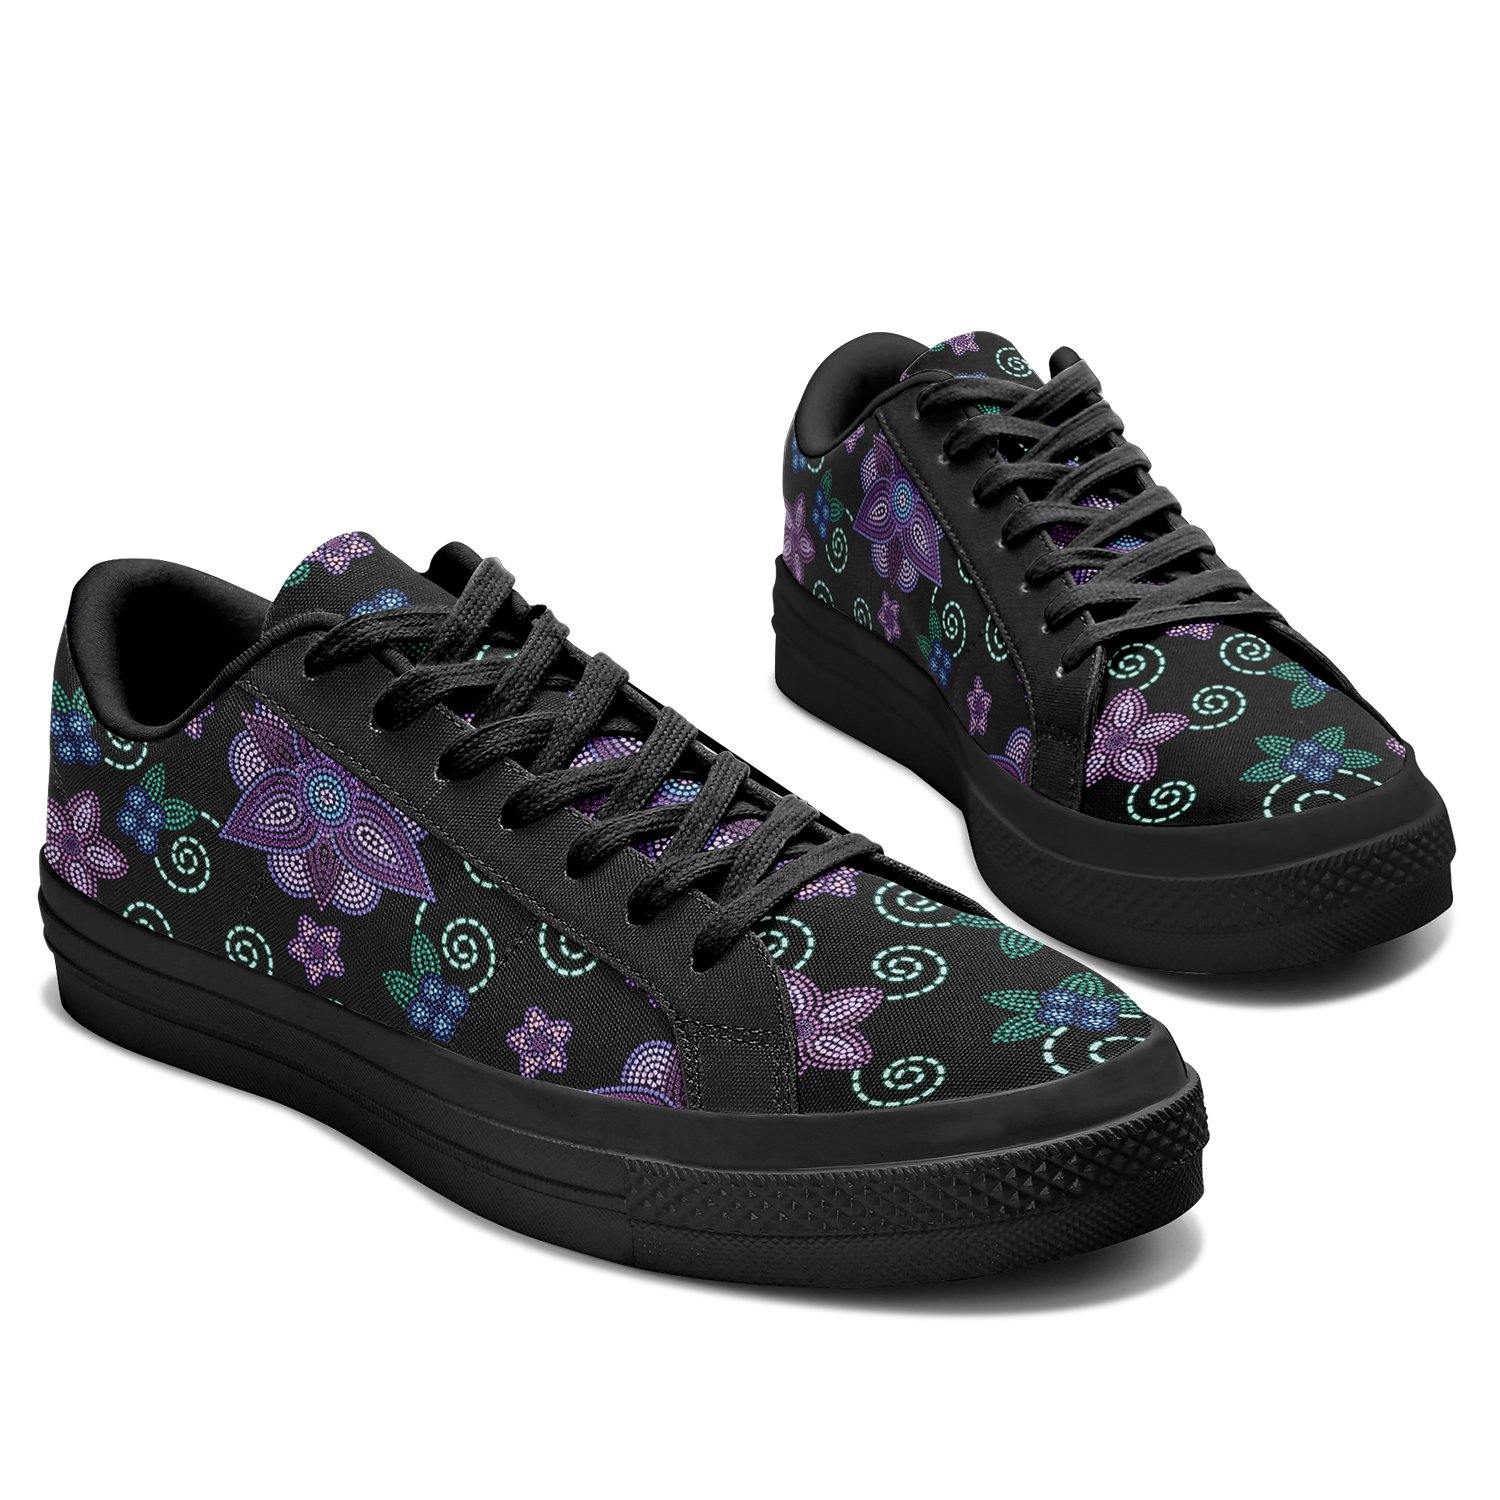 Berry Picking Aapisi Low Top Canvas Shoes Black Sole aapisi Herman 